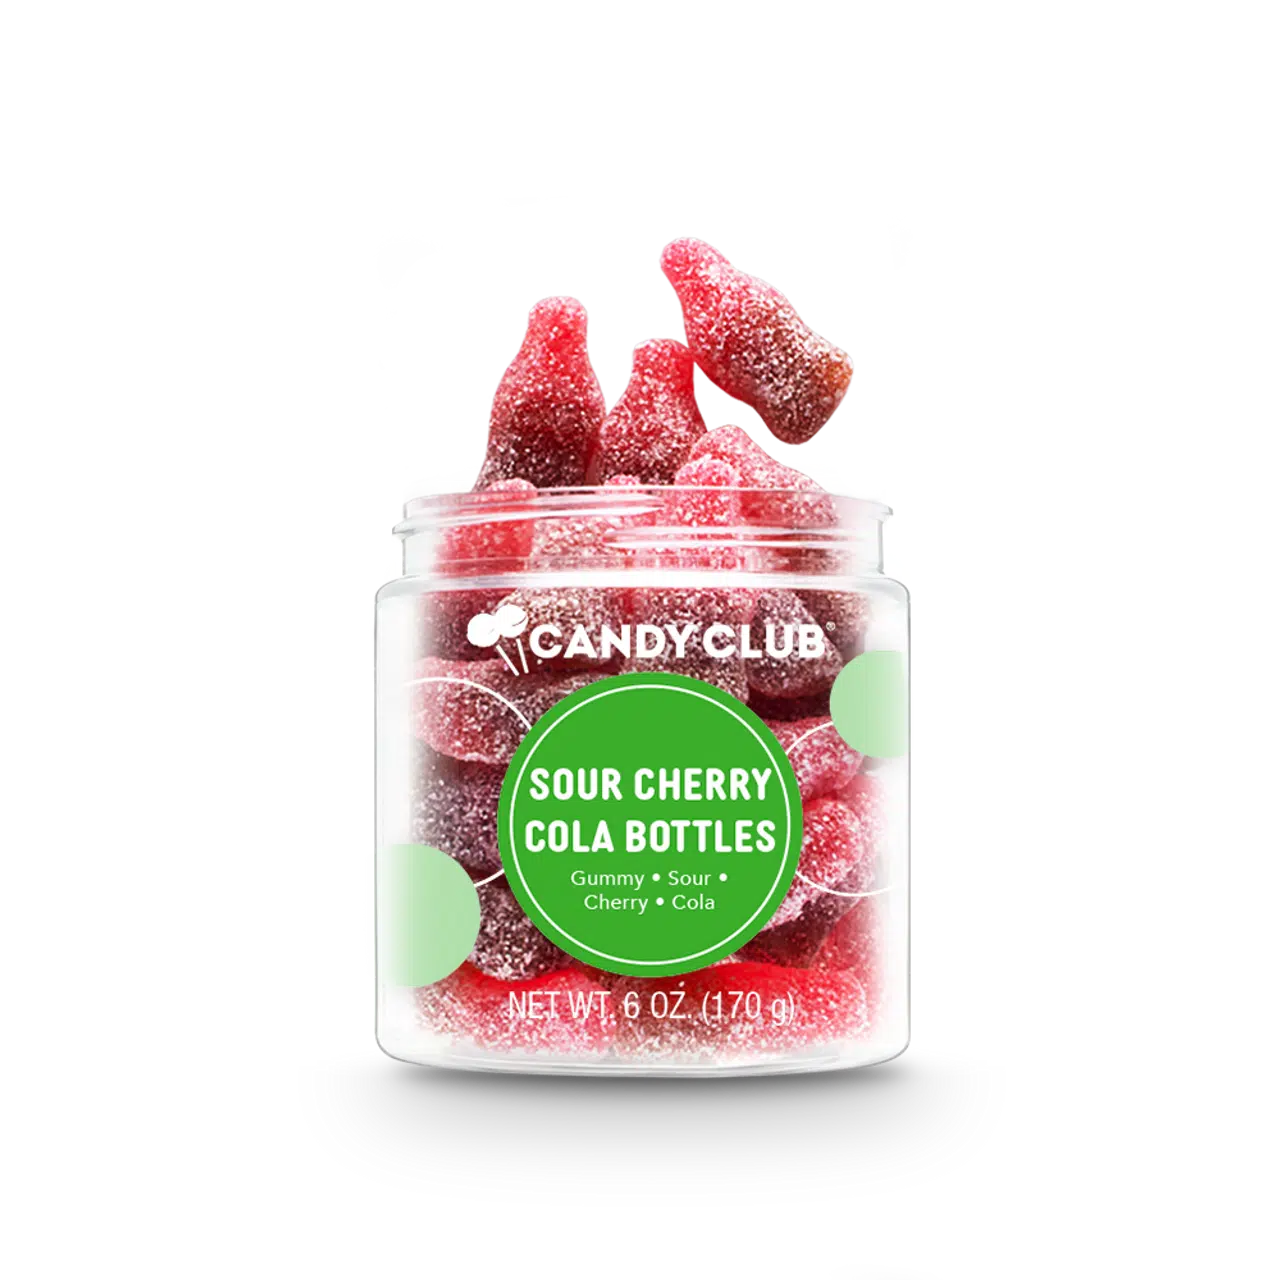 Candy Club-Sour Cherry Cola Bottles Small Jar-RSSG18-00-86-Legacy Toys